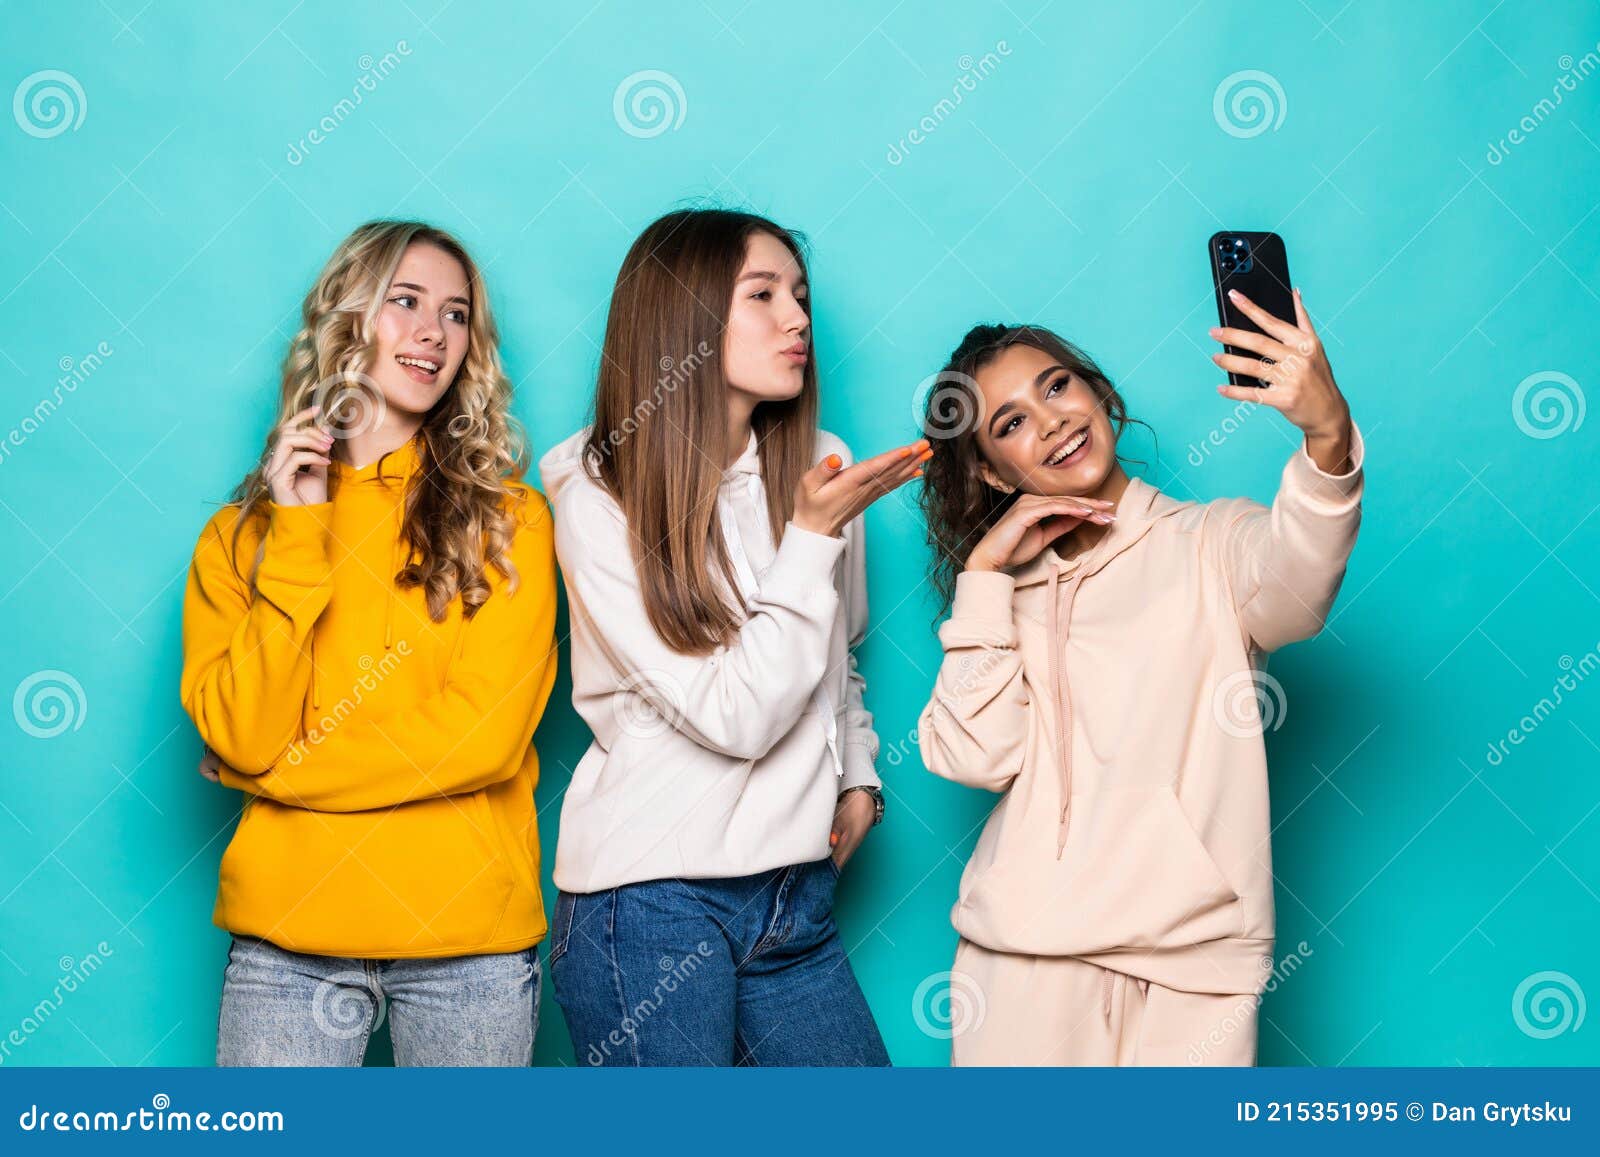 selfie pose ideas for the girls 🫶🏻 save and screenshot for later 🎀 ... |  TikTok